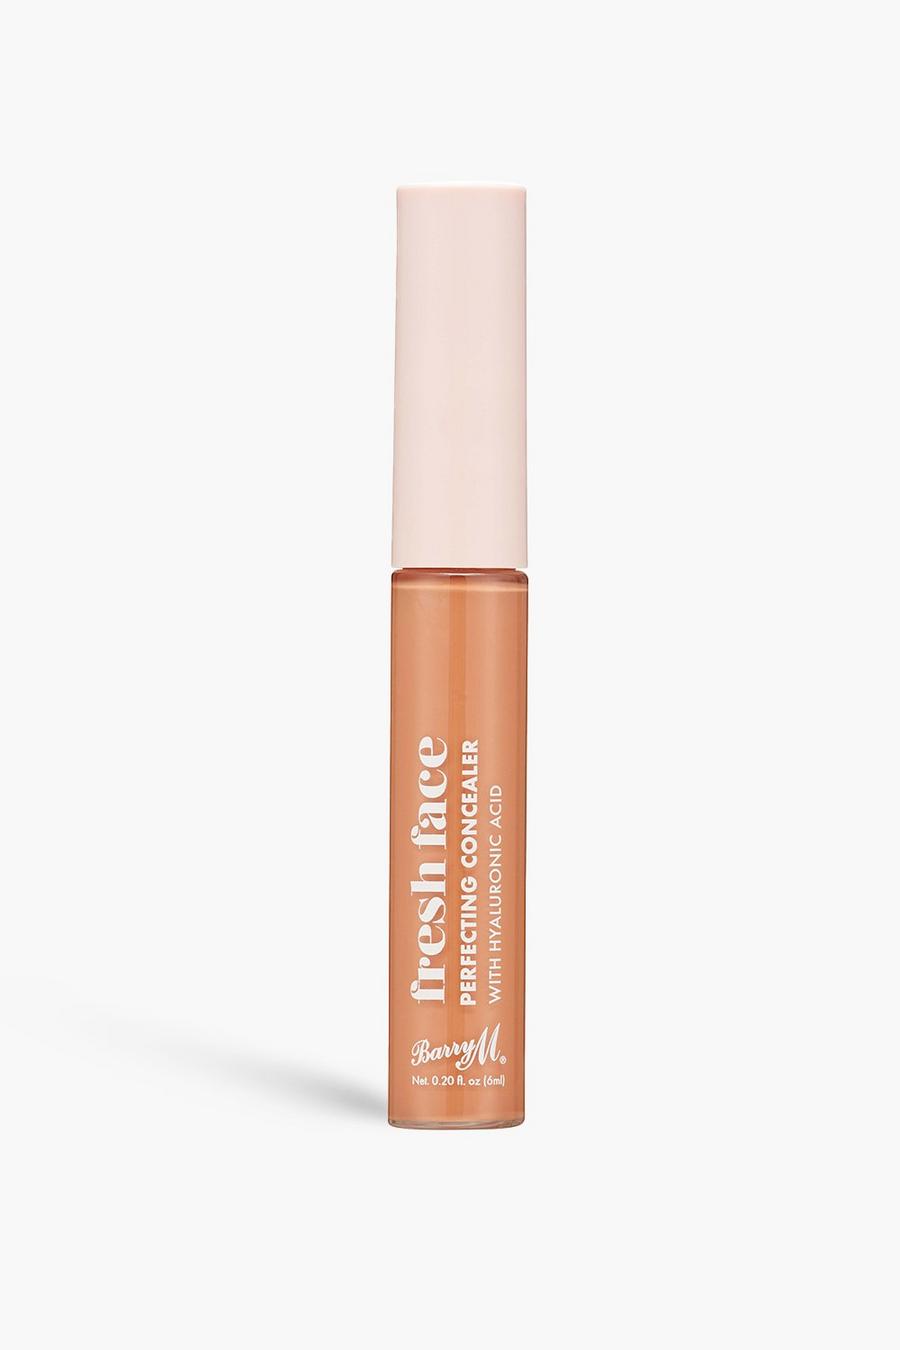 Barry M Fresh Face Perfecting Concealer 8, Tan brown